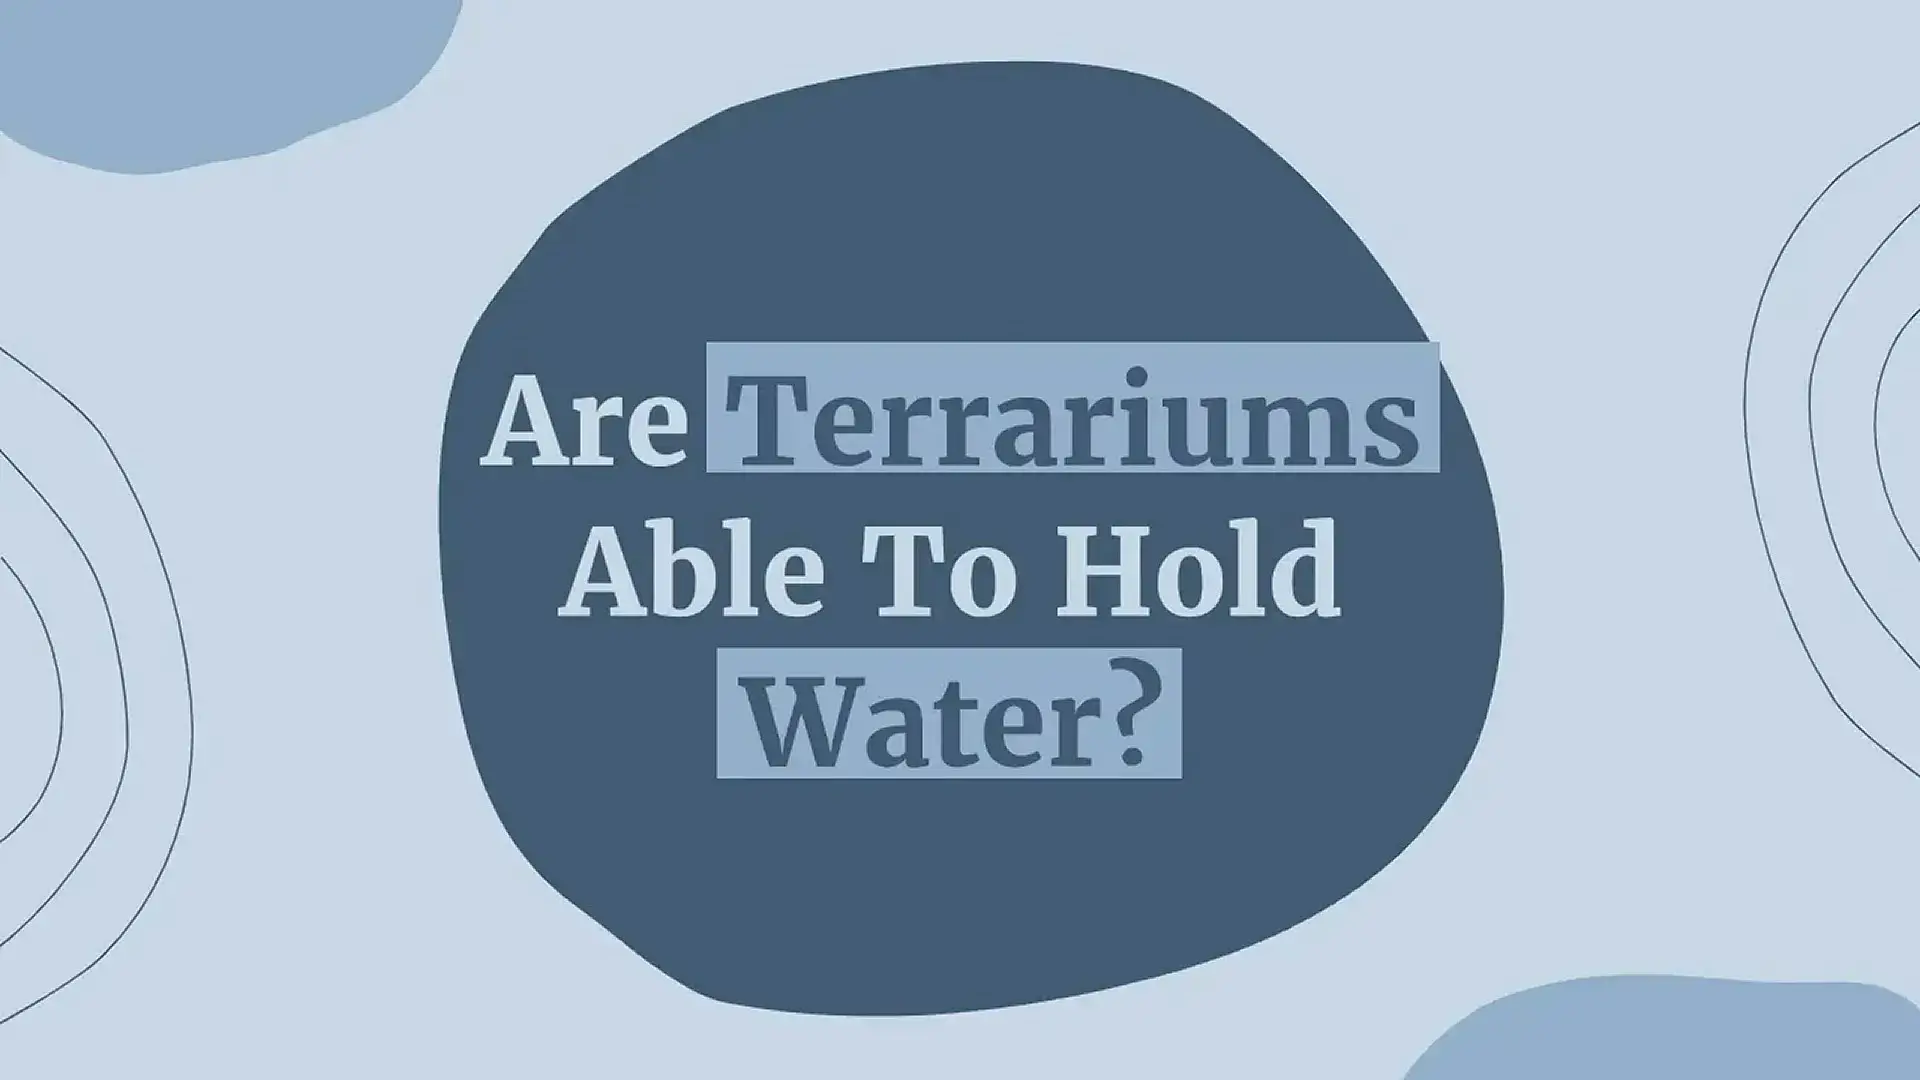 'Video thumbnail for Are Terrariums Able To Hold Water?'